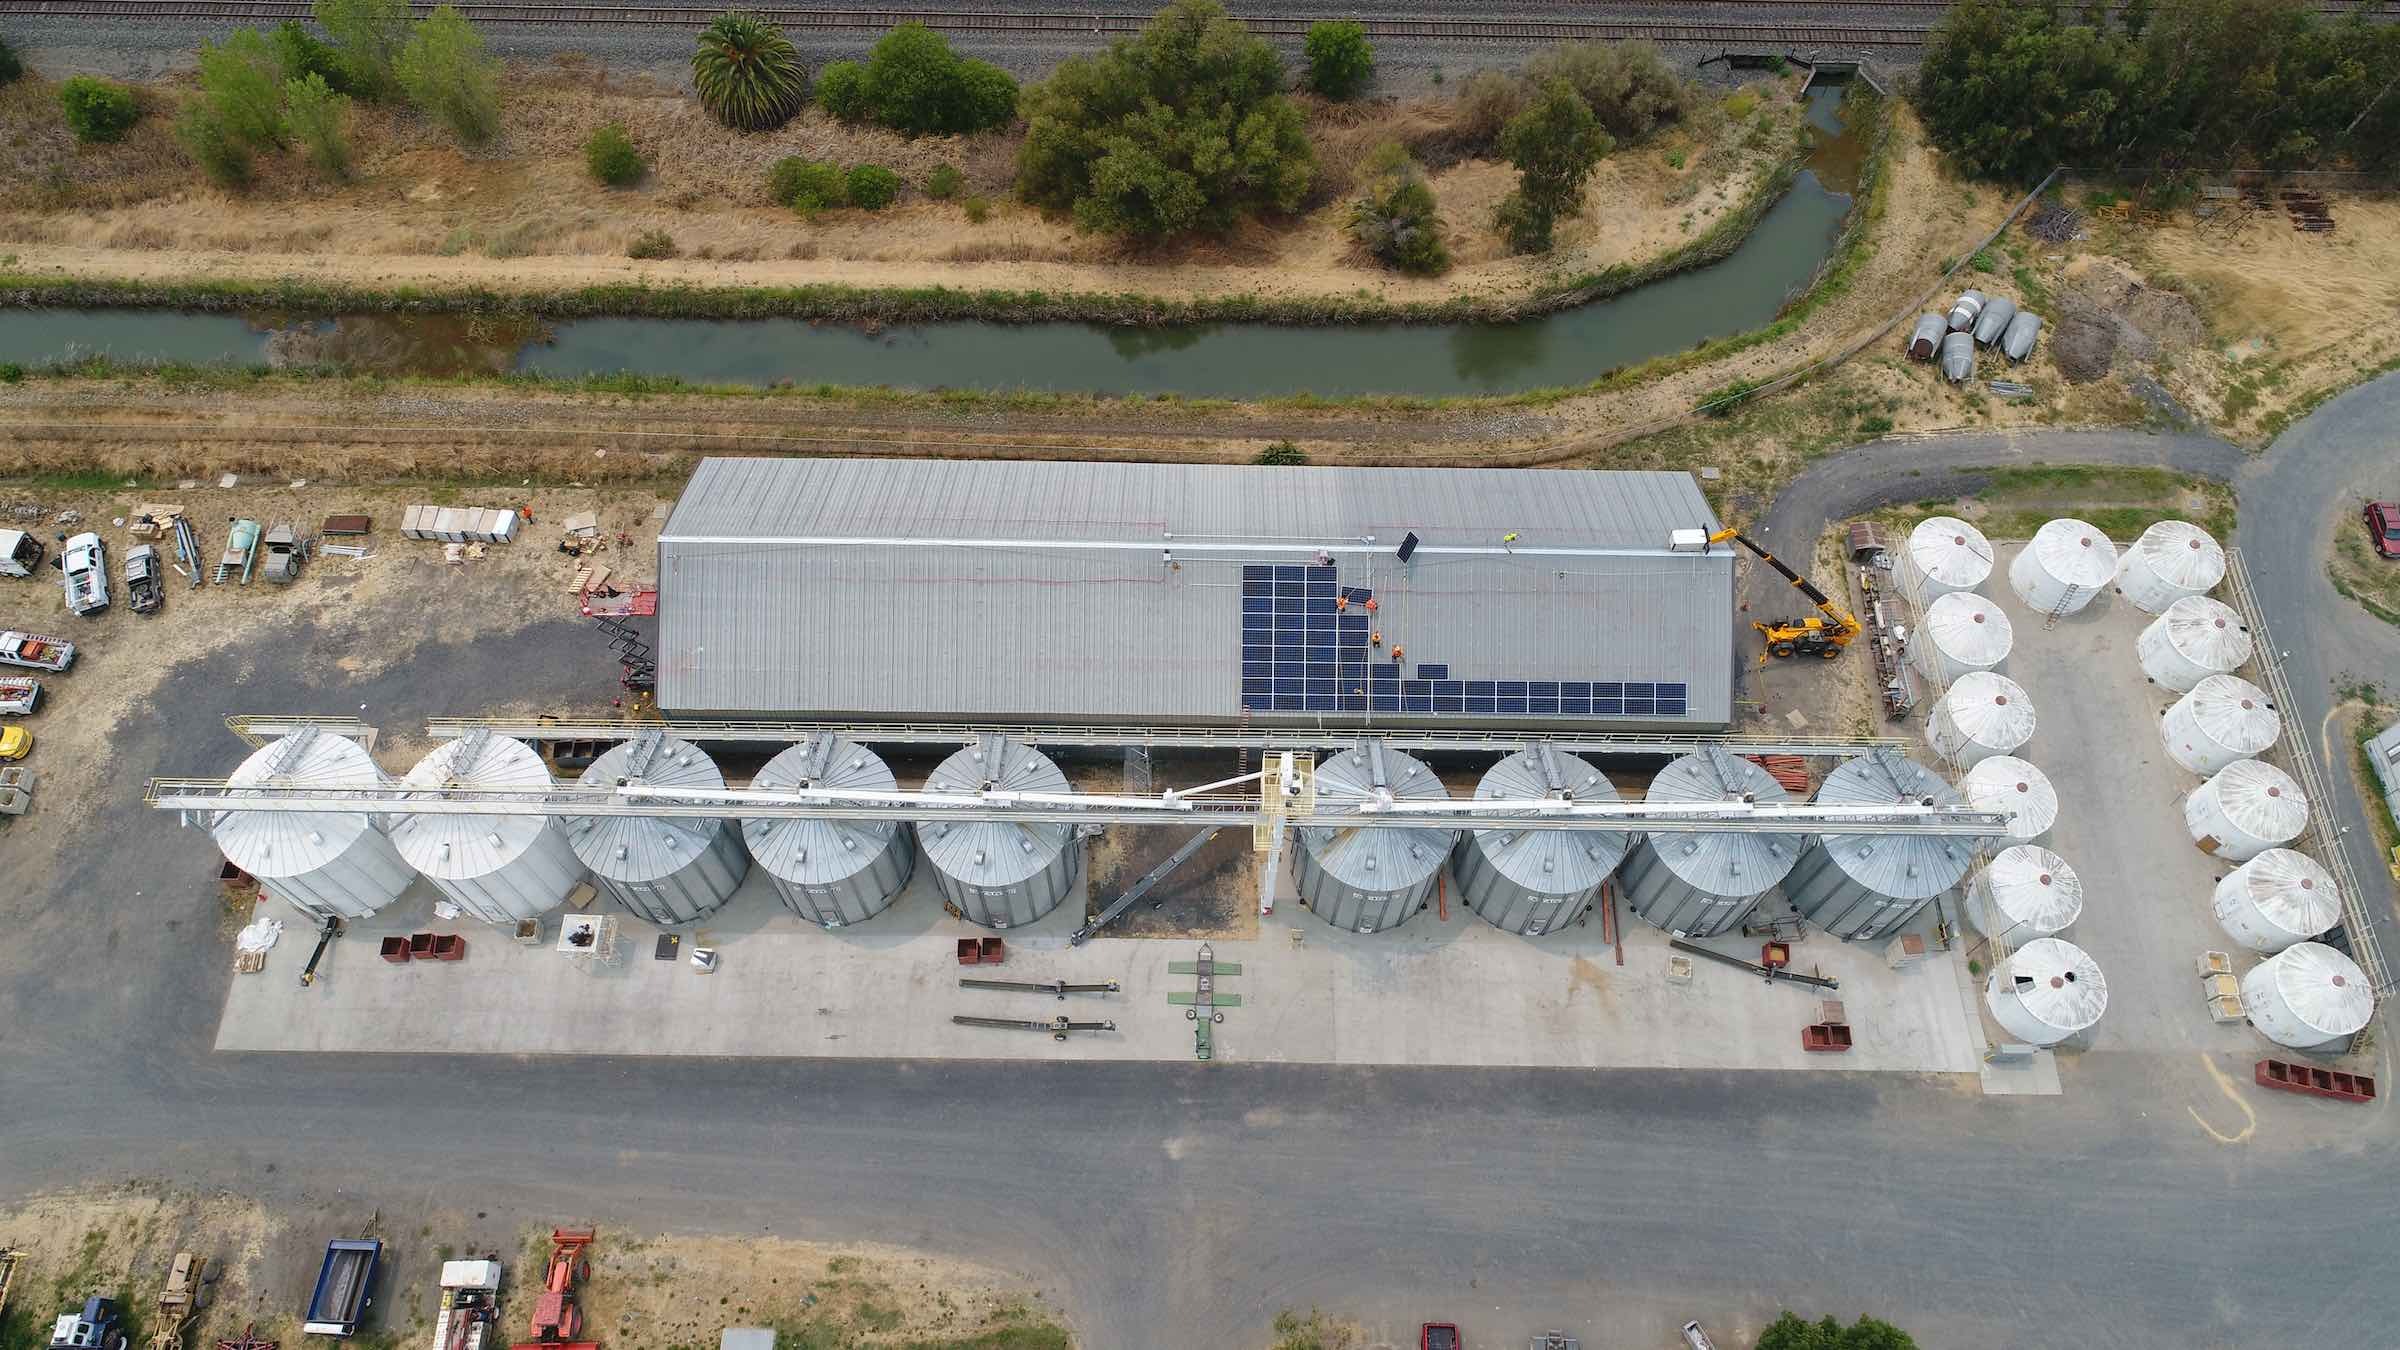 Solar panels are installed atop the Harvest Building at Lundberg's Drying & Storage facilities.